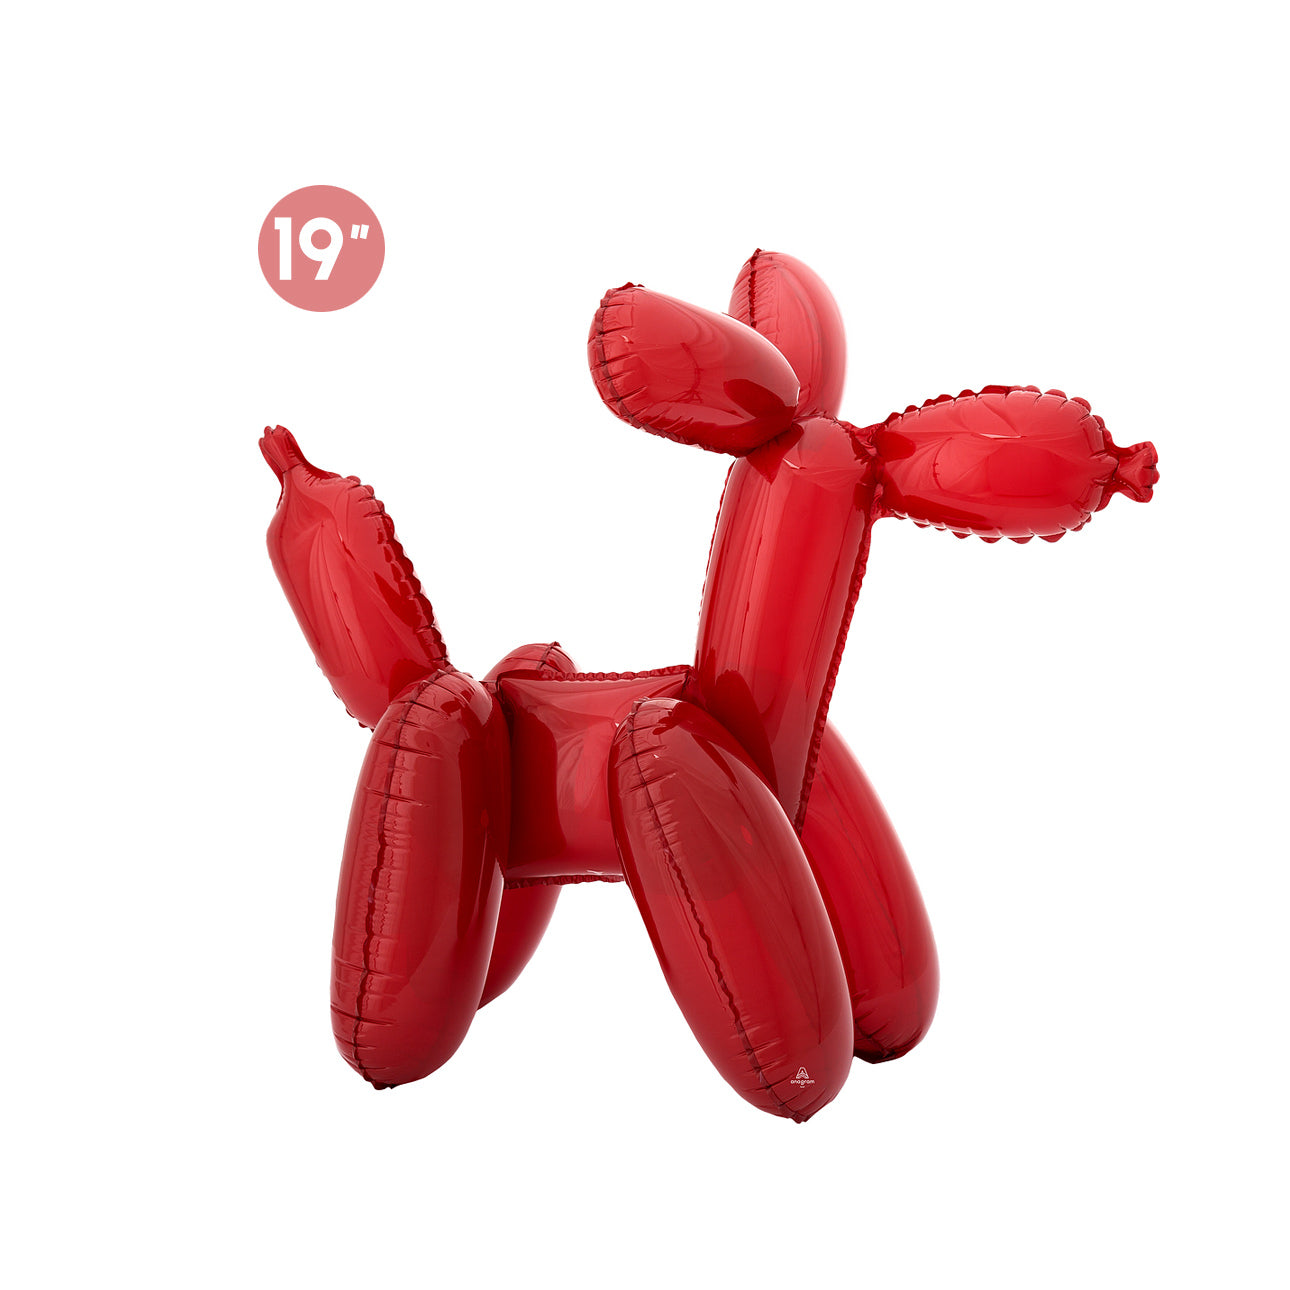 3D Red Dog Foil Balloon 19"